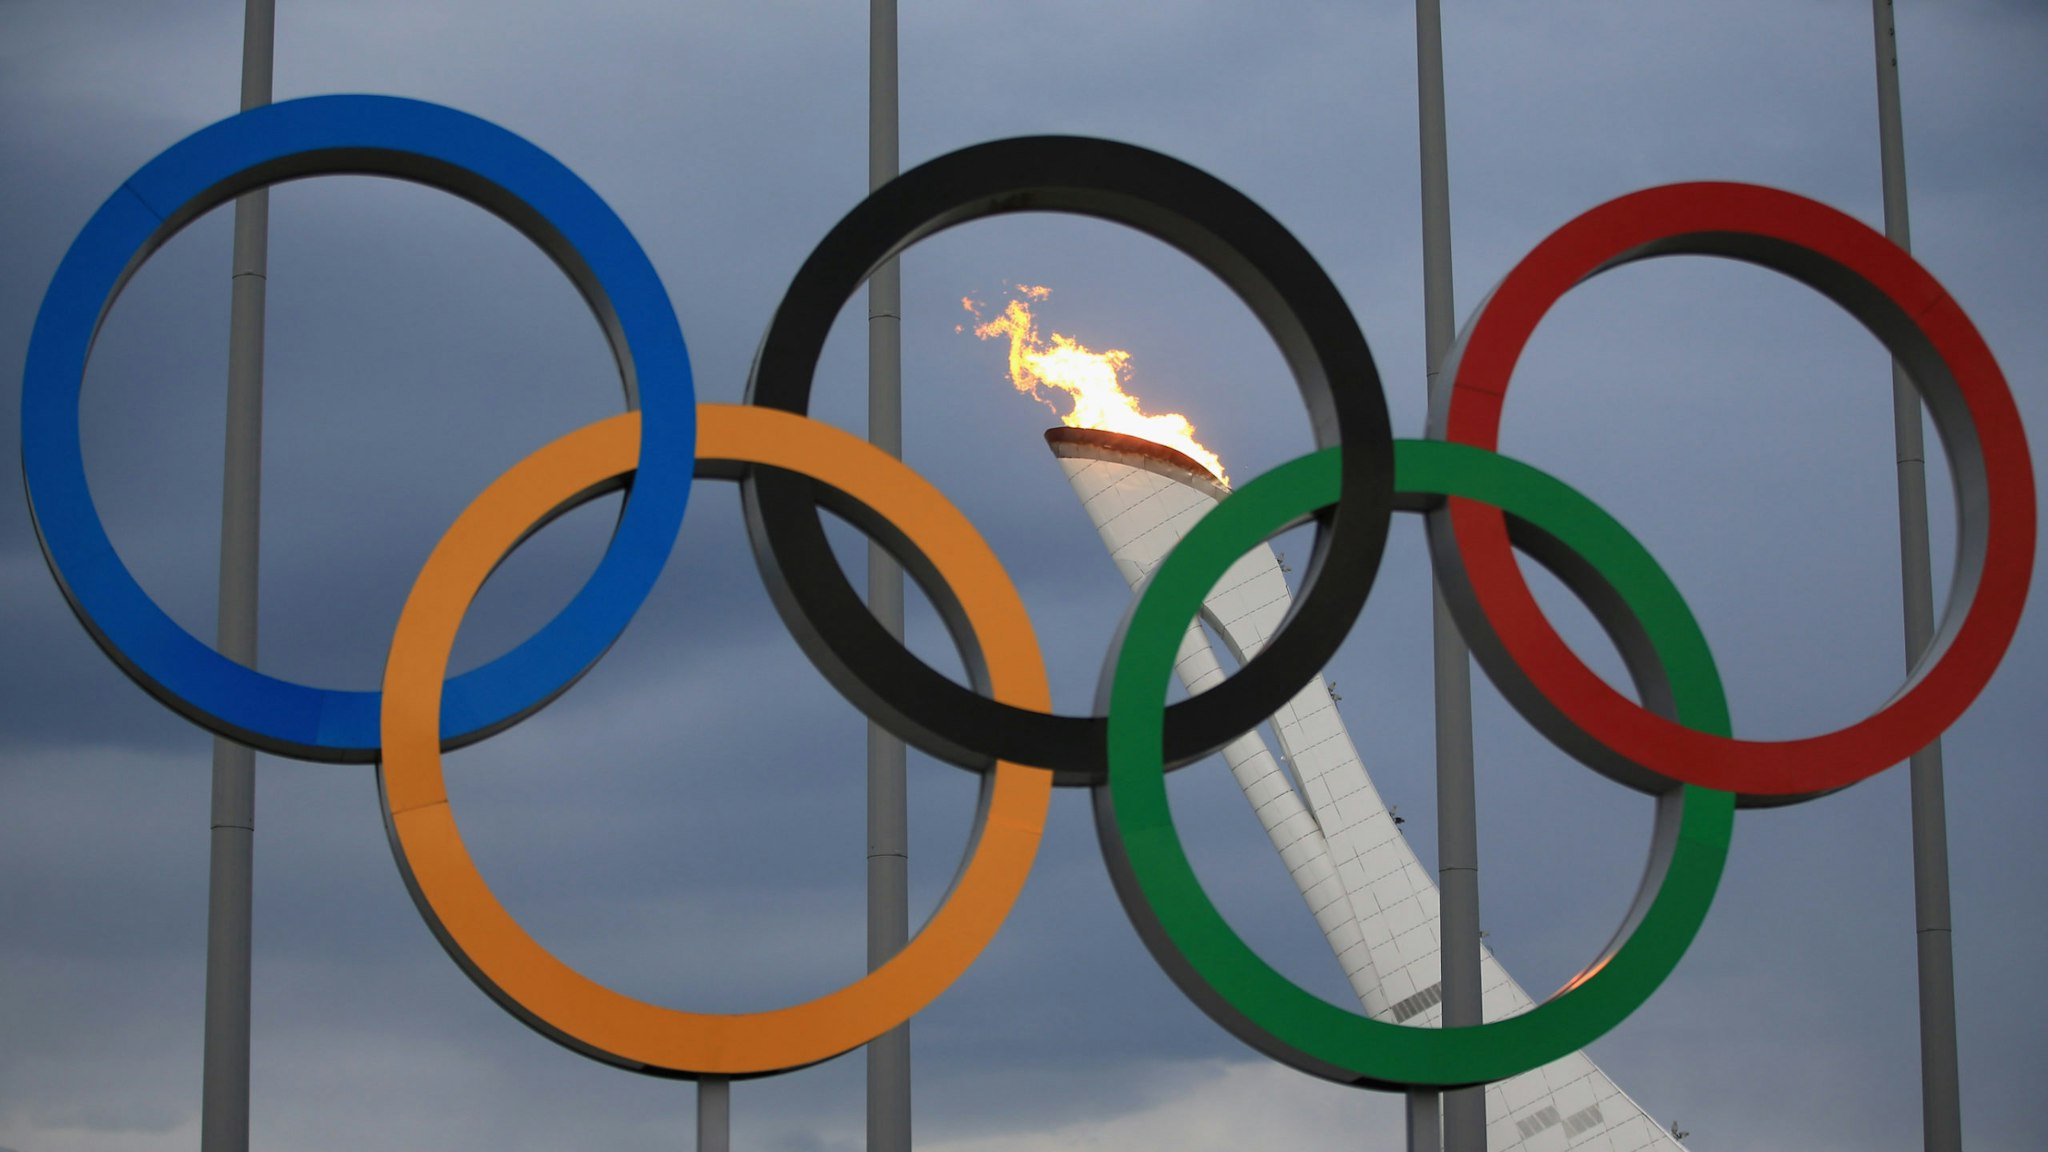 The Olympic Cauldron is tested by fire crews at the Sochi 2014 Winter Olympic Park in the Costal Cluster on January 27, 2014 in Sochi, Russia.